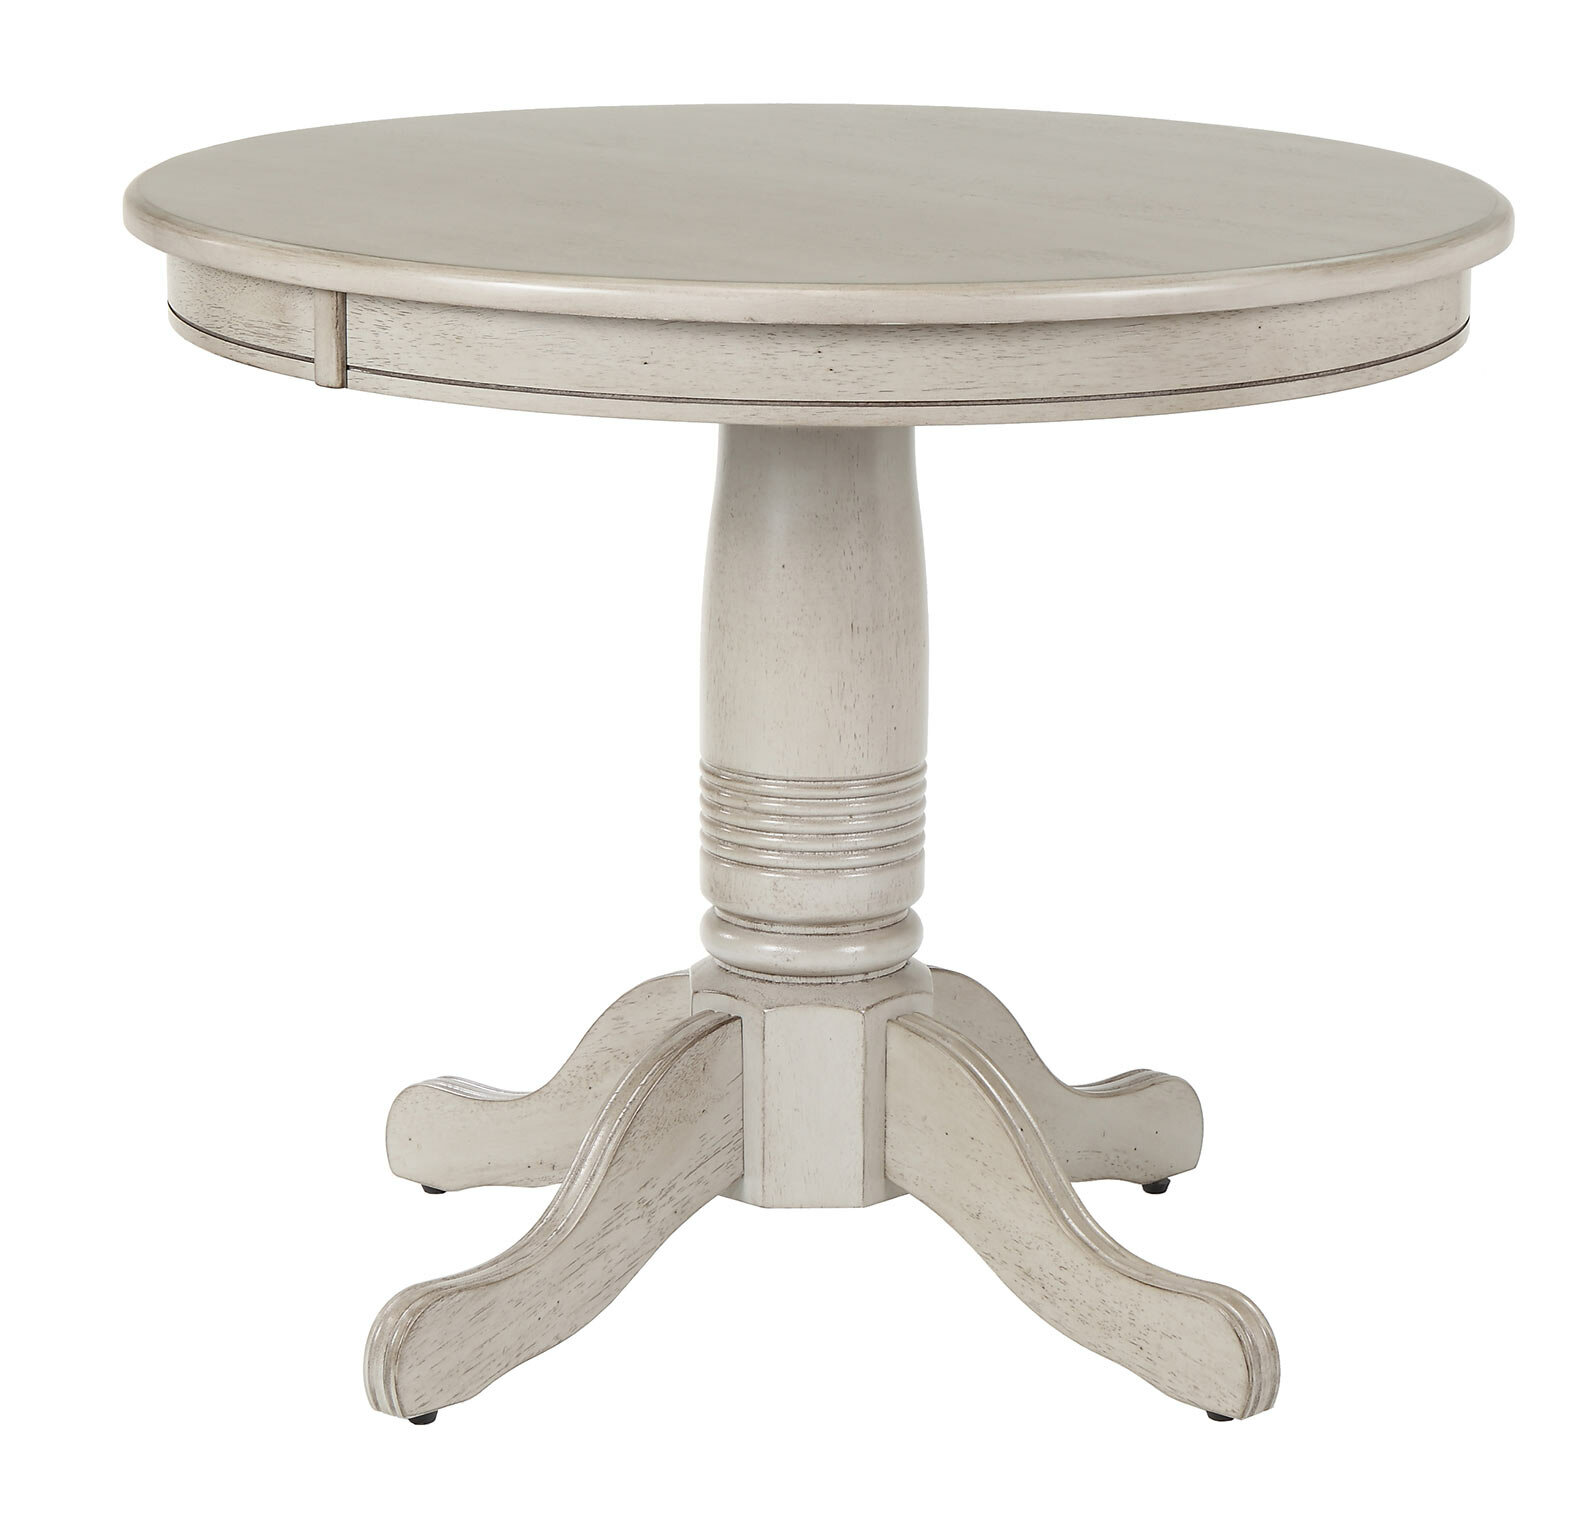 Beachcrest Home Tevis Round Solid Wood Dining Table & Reviews | Wayfair